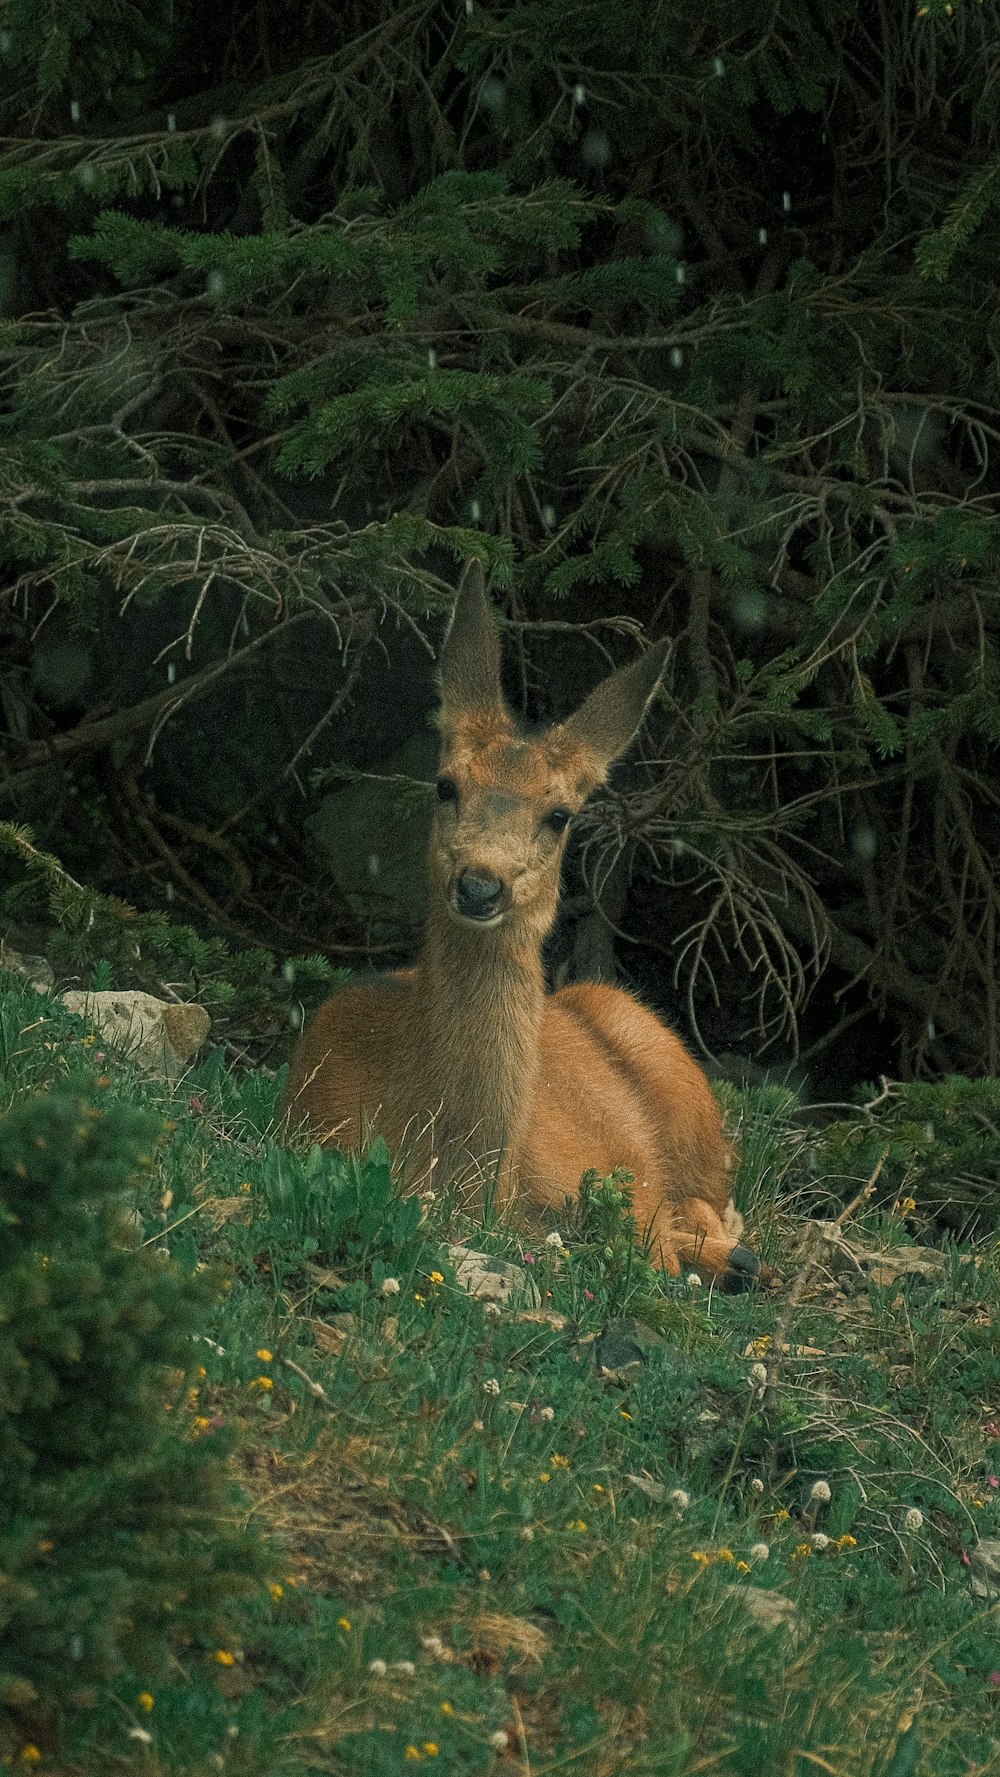 a deer laying down in the grass next to some trees